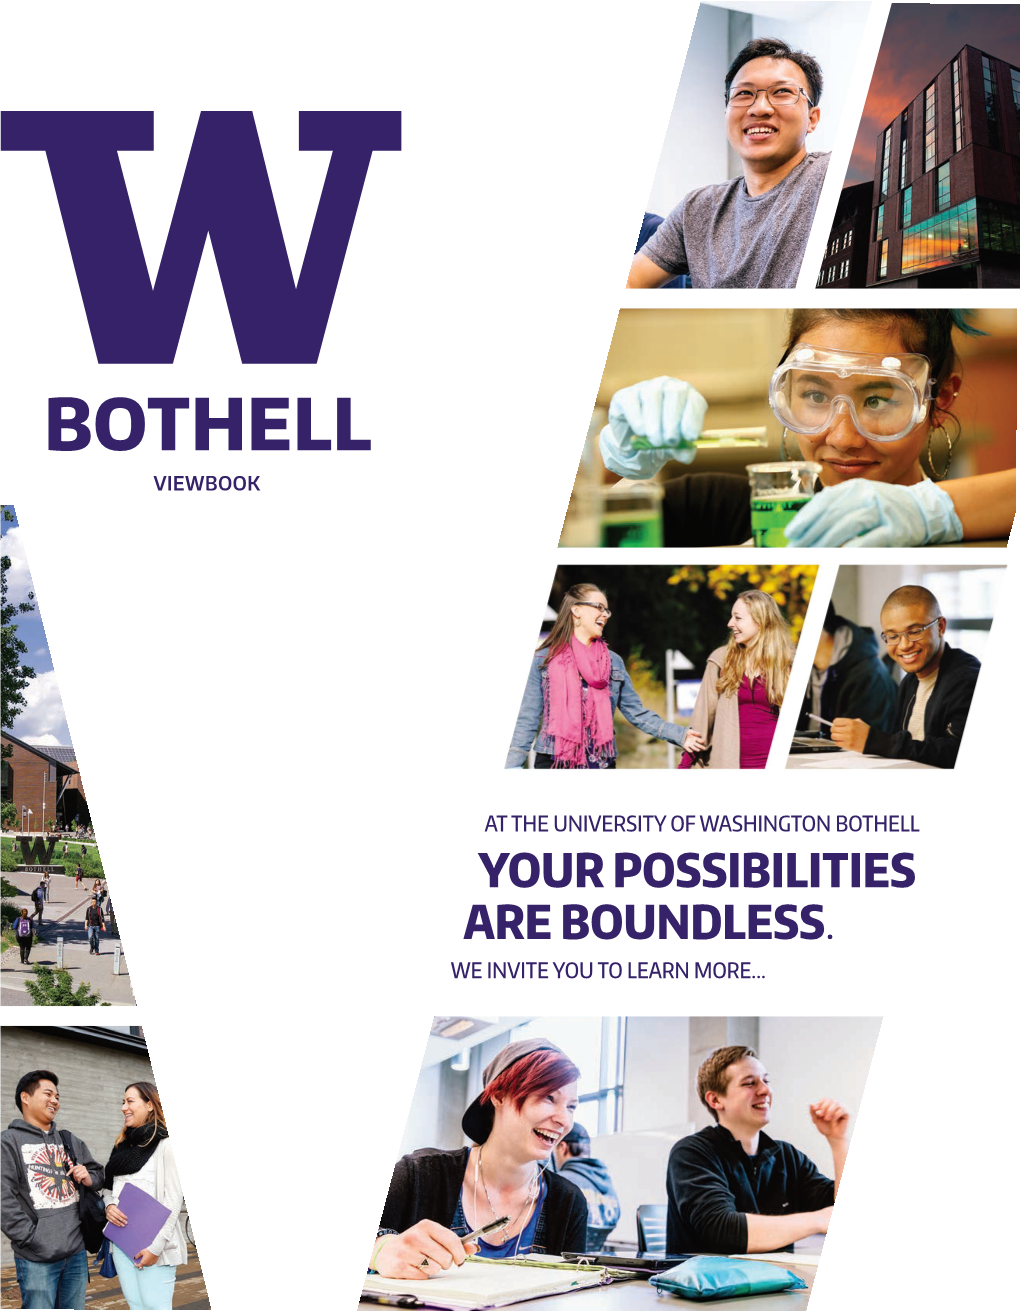 Download the Accessible PDF Version of the UW